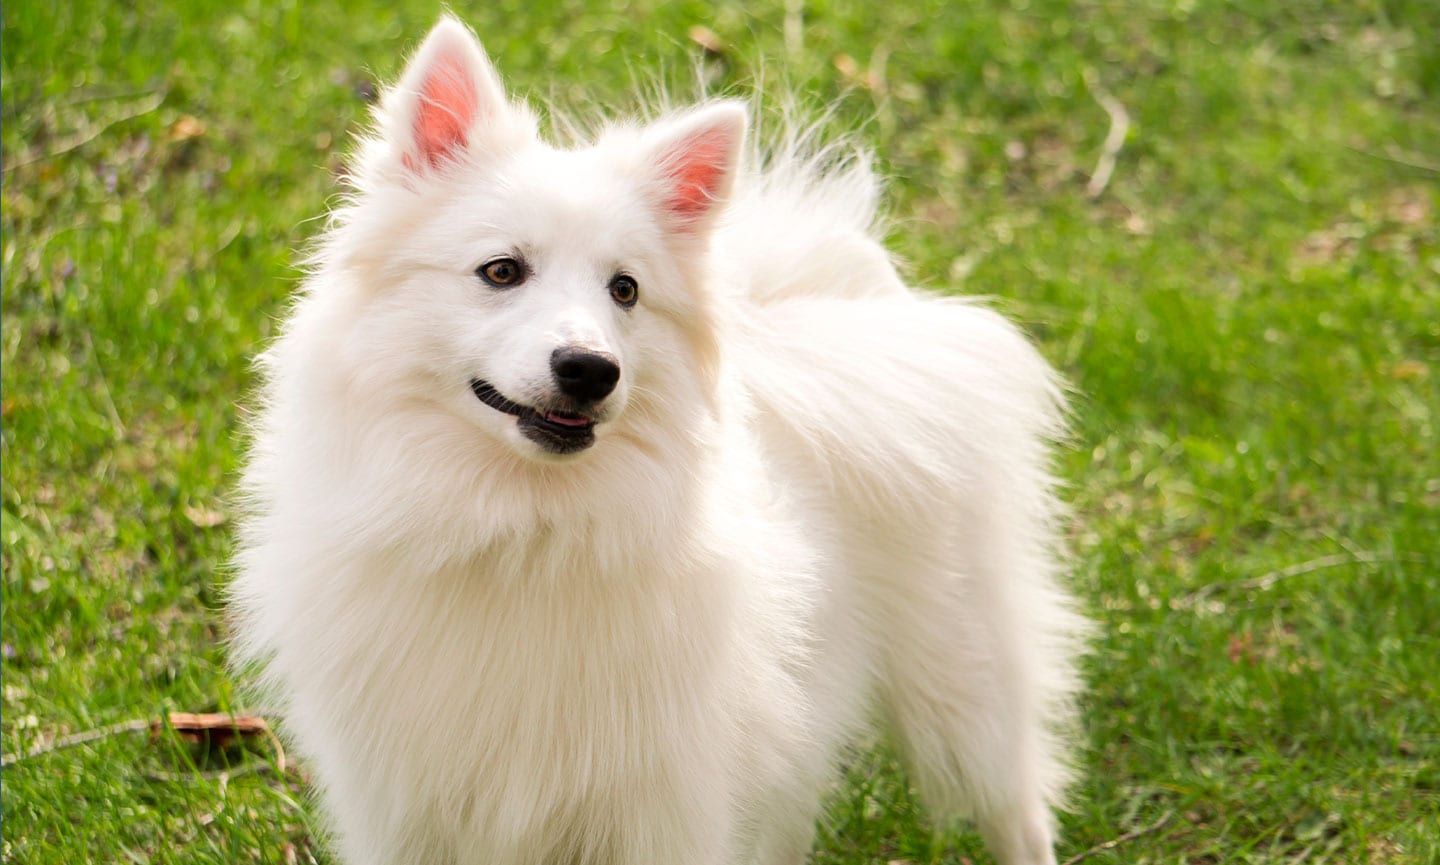 a dog which looks like american eskimo but bigger